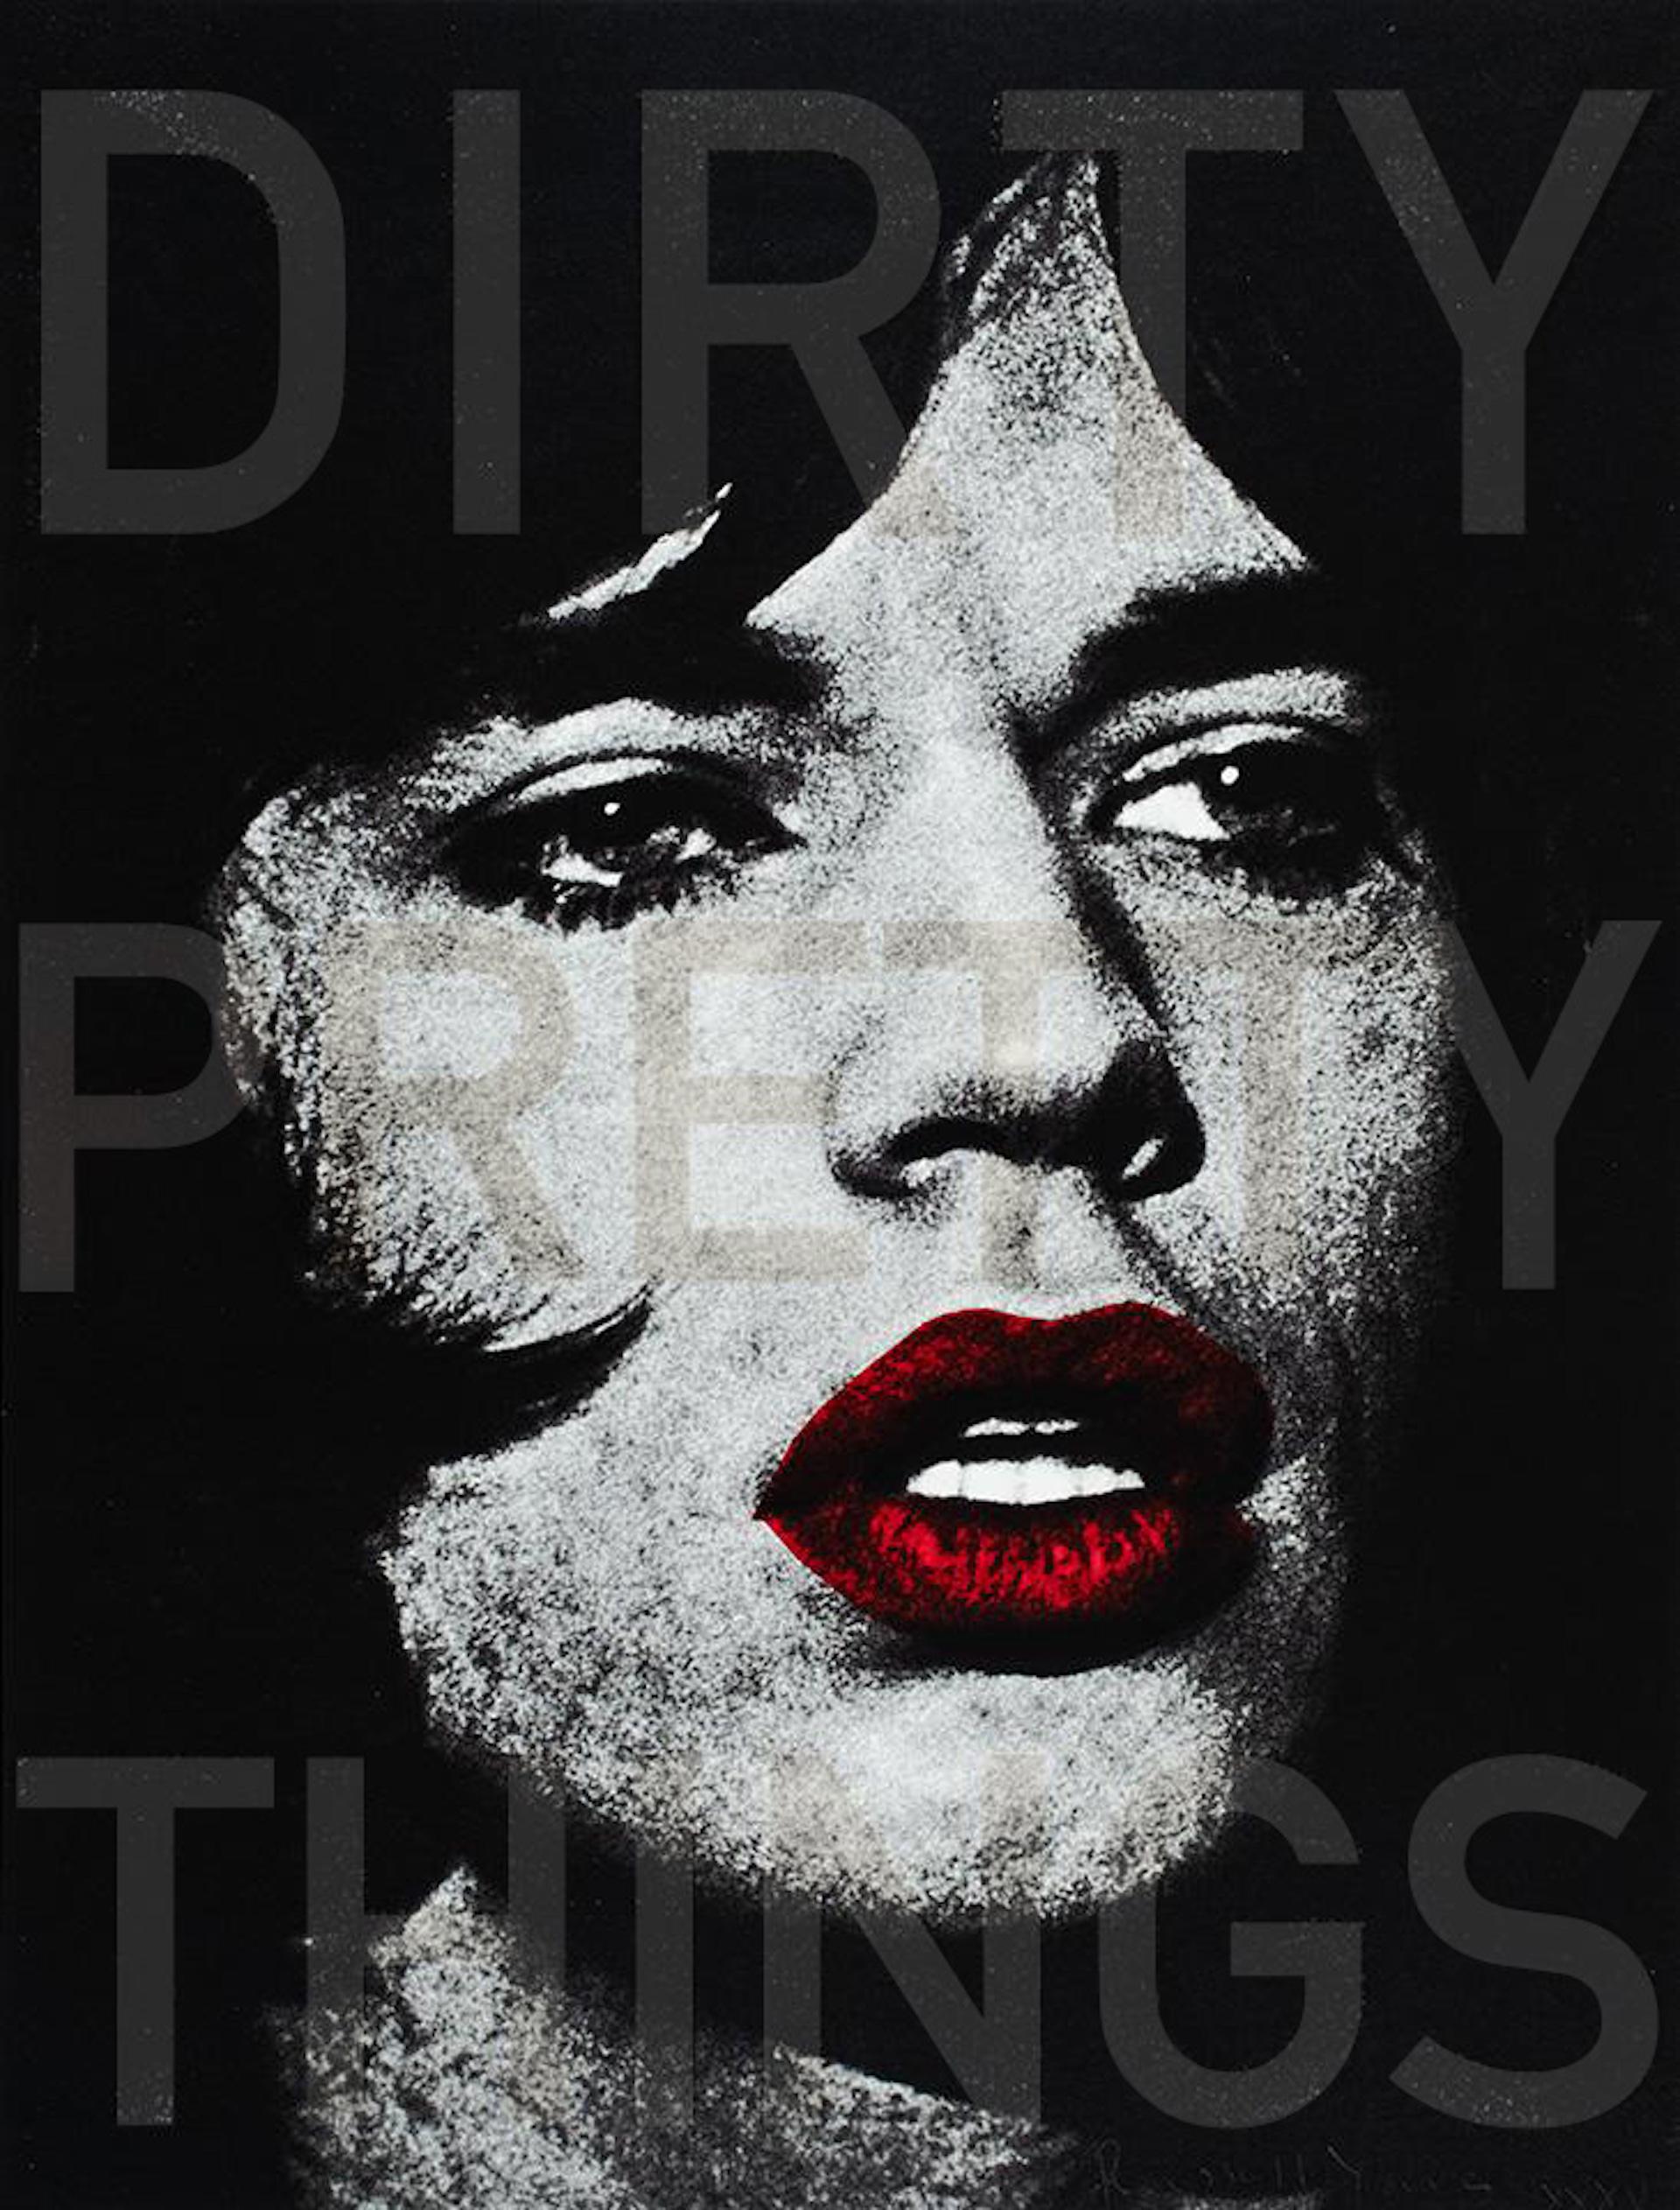 Russell Young Portrait Print - Jagger (Dirty Pretty Things)